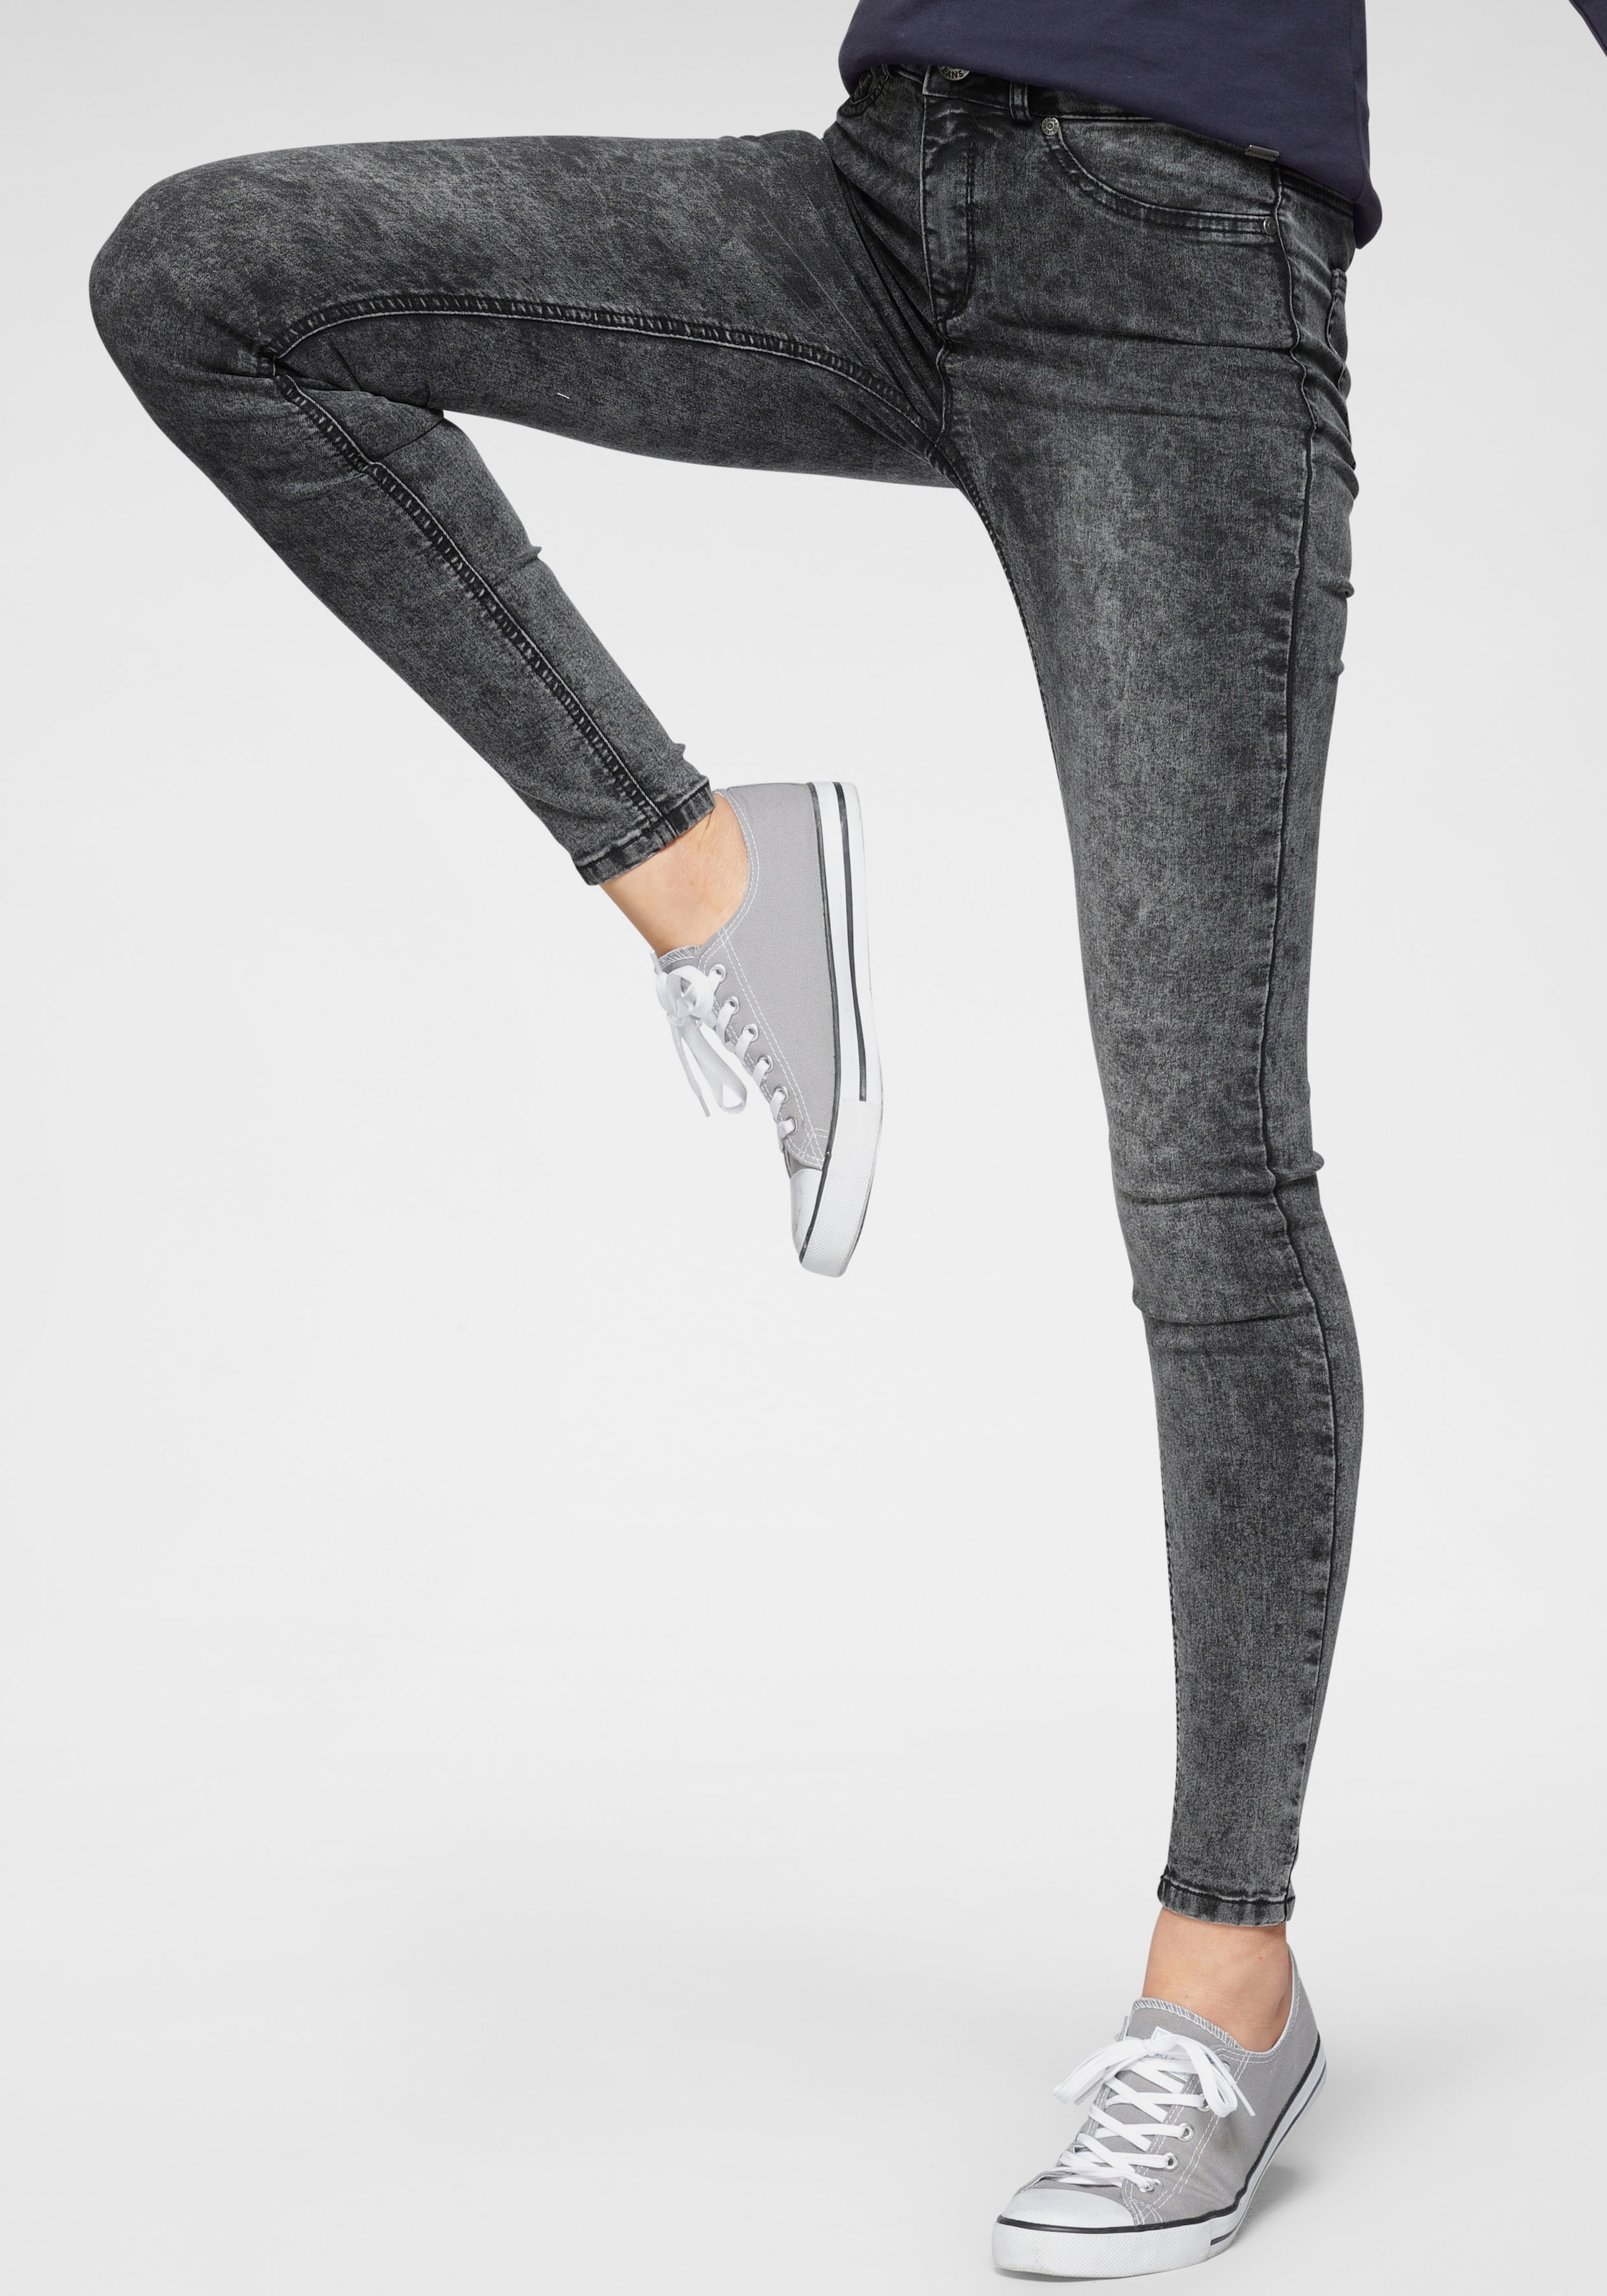 Arizona Skinny-fit-Jeans »Ultra Shop moon Moonwashed Online OTTO washed«, Jeans im Stretch